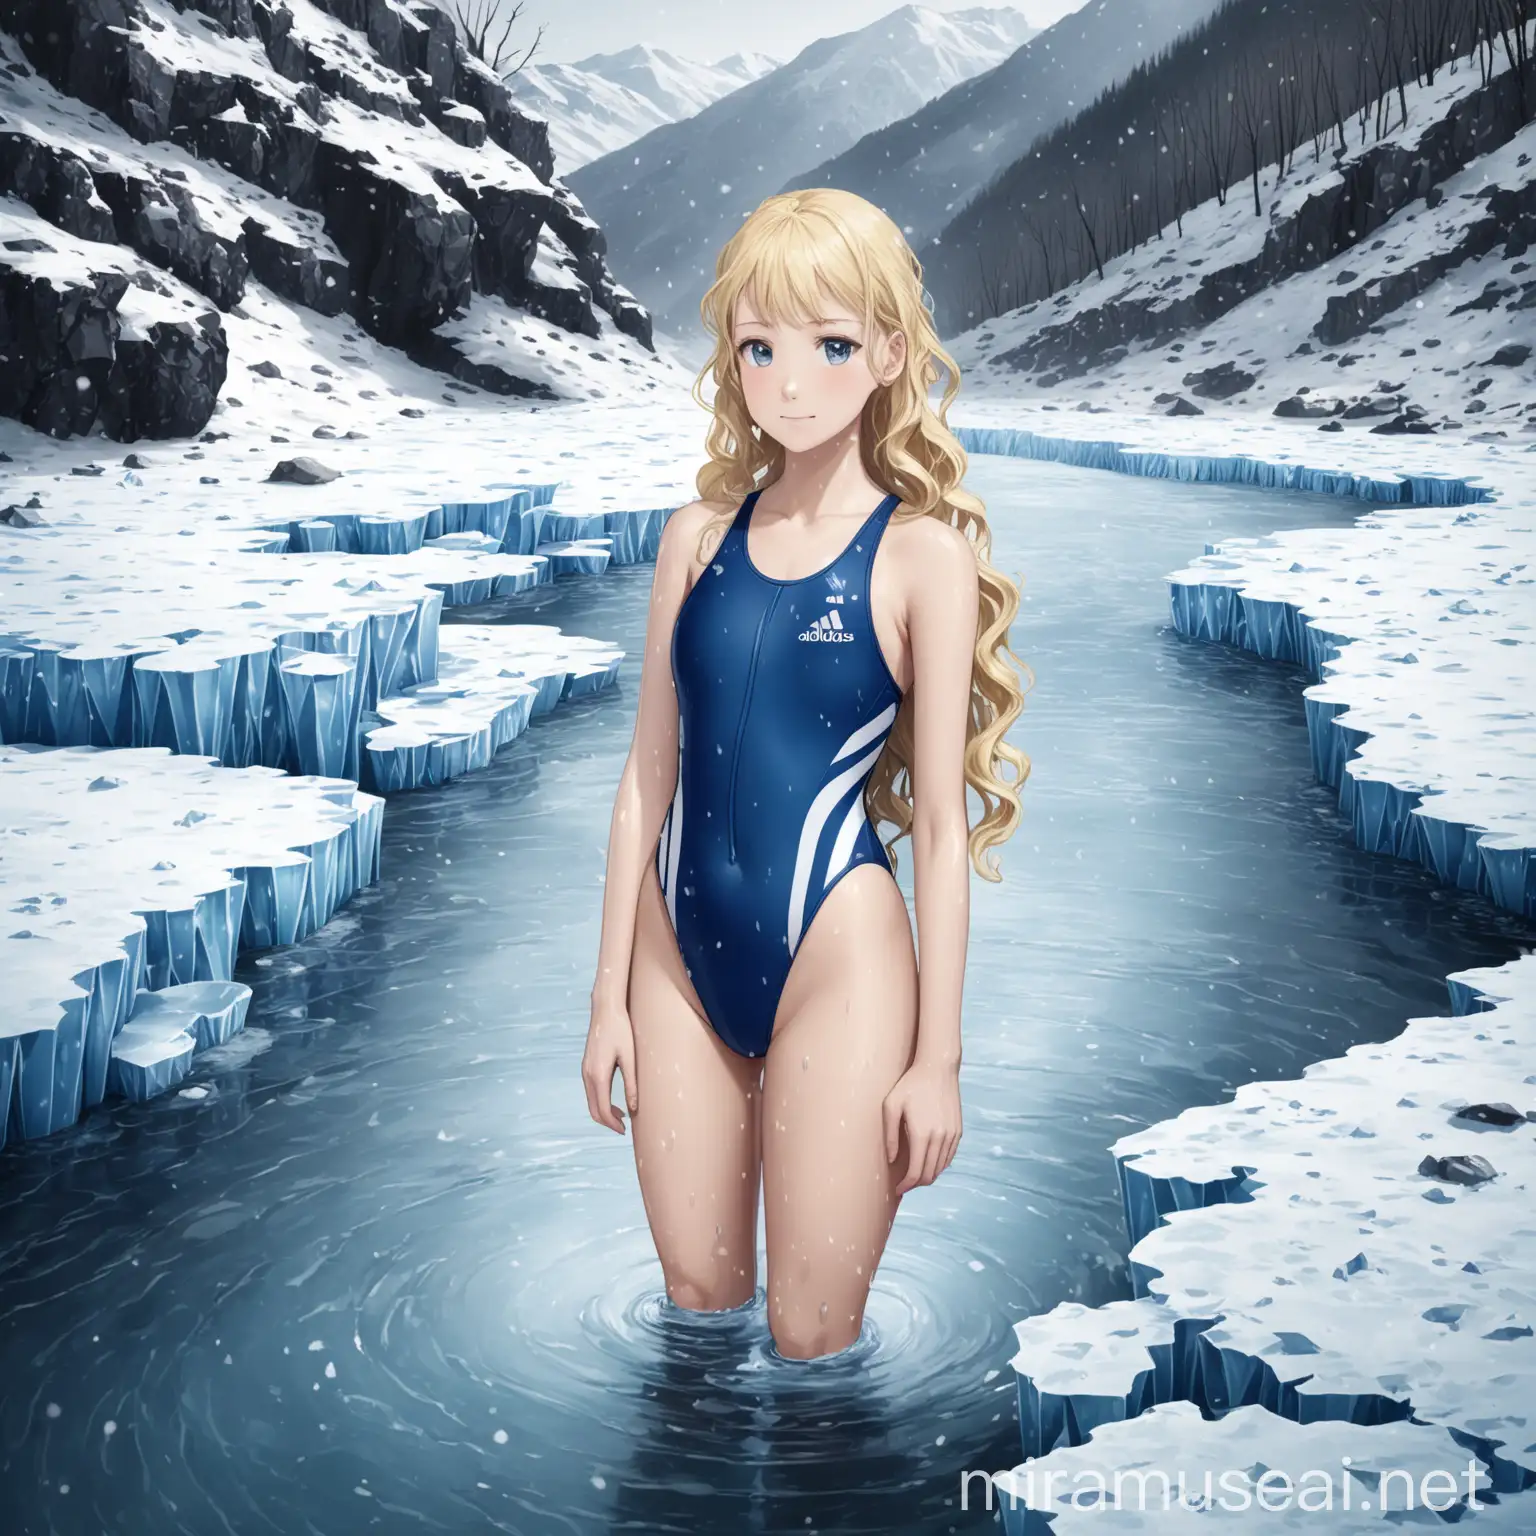 Blond Swimmers in Adidas Competition Swimsuits Standing in Frozen Mountain Stream